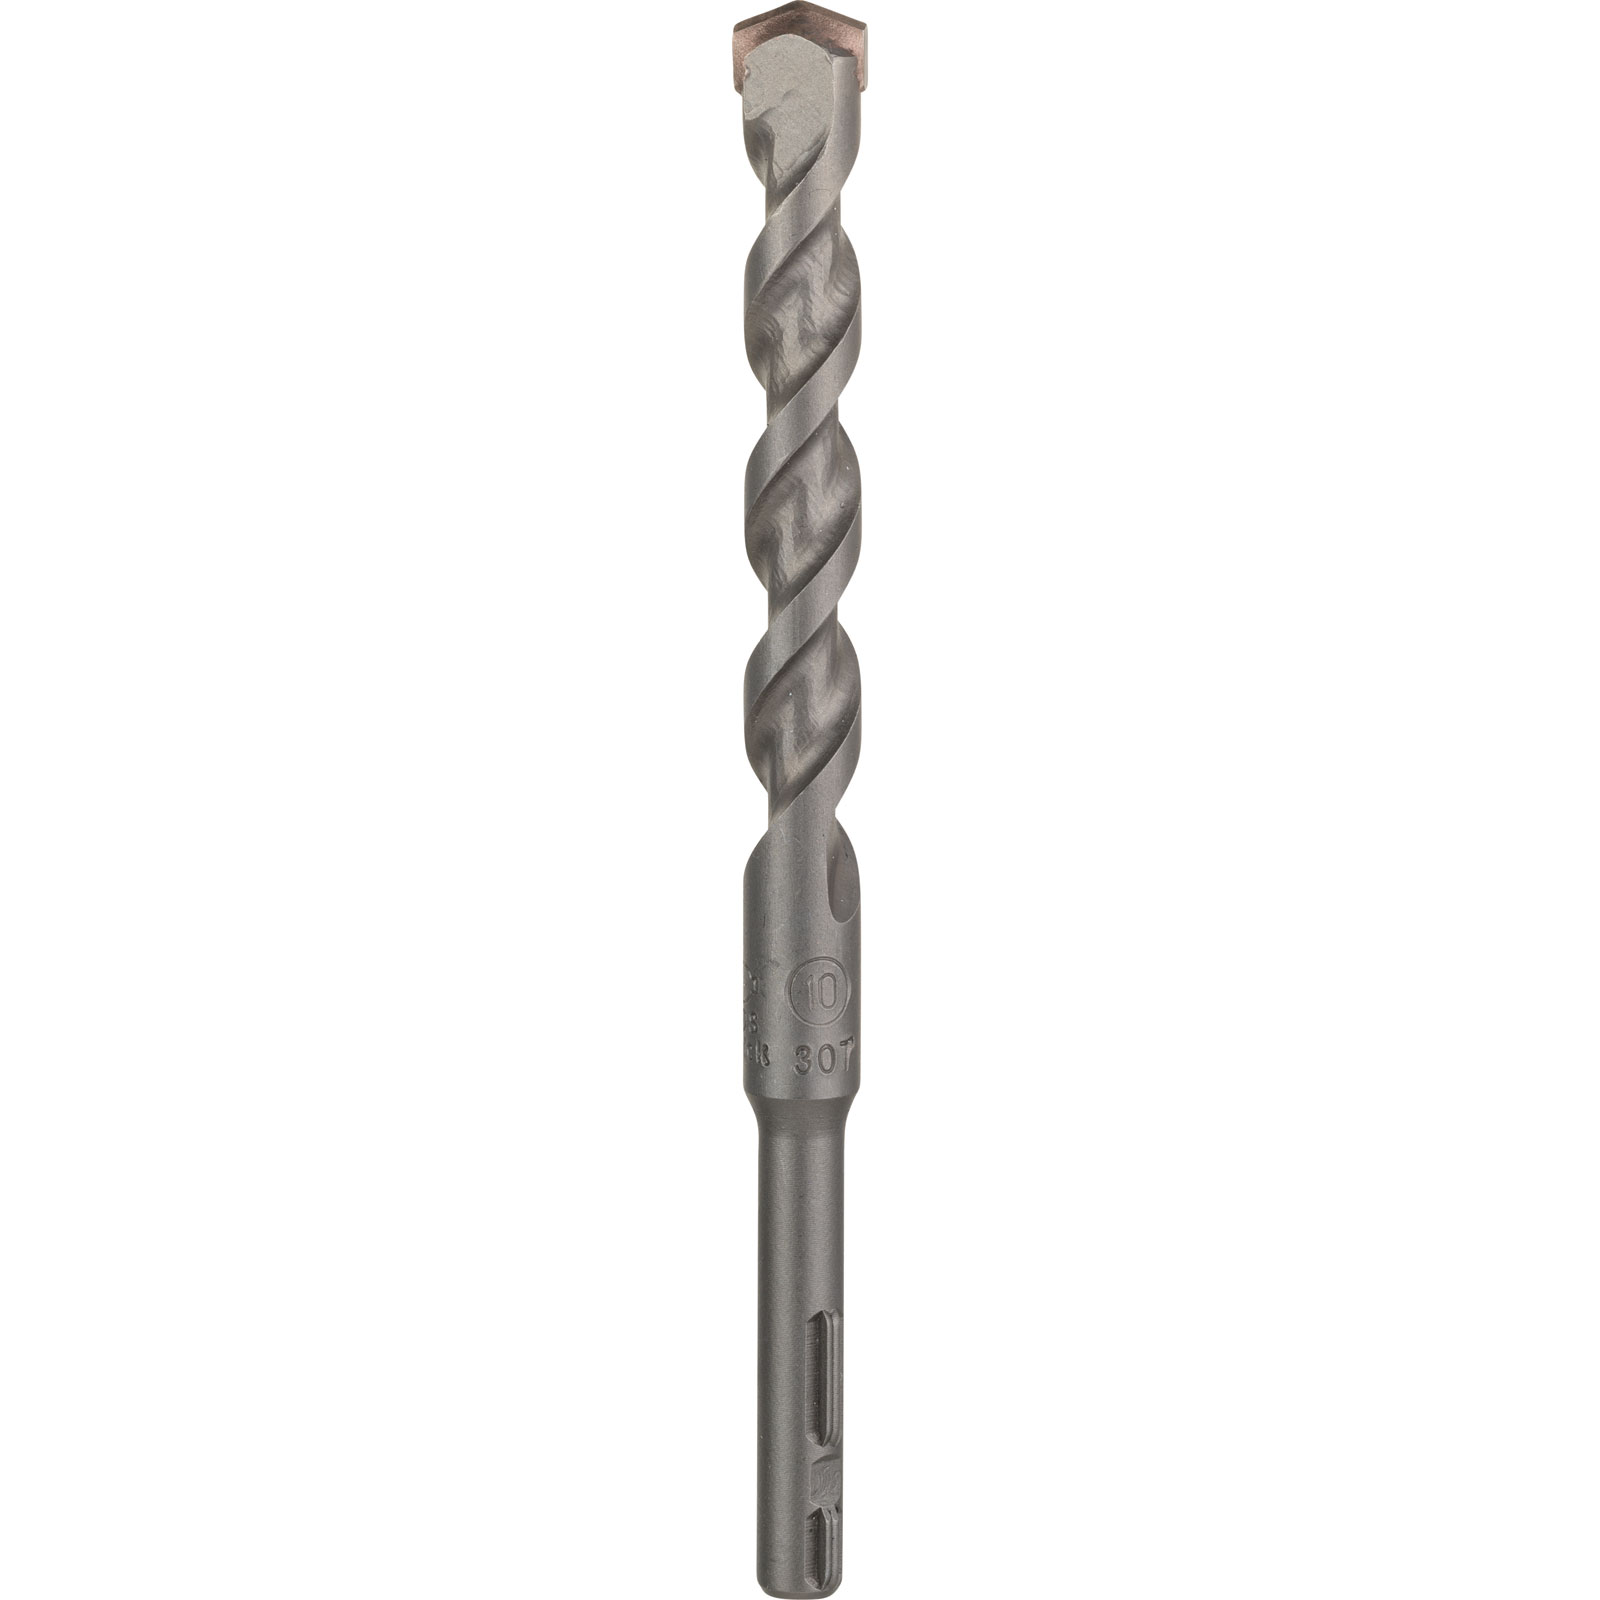 Photo of Bosch Uneo Sds Quick Masonary Drill Bit 10mm 120mm Pack Of 1